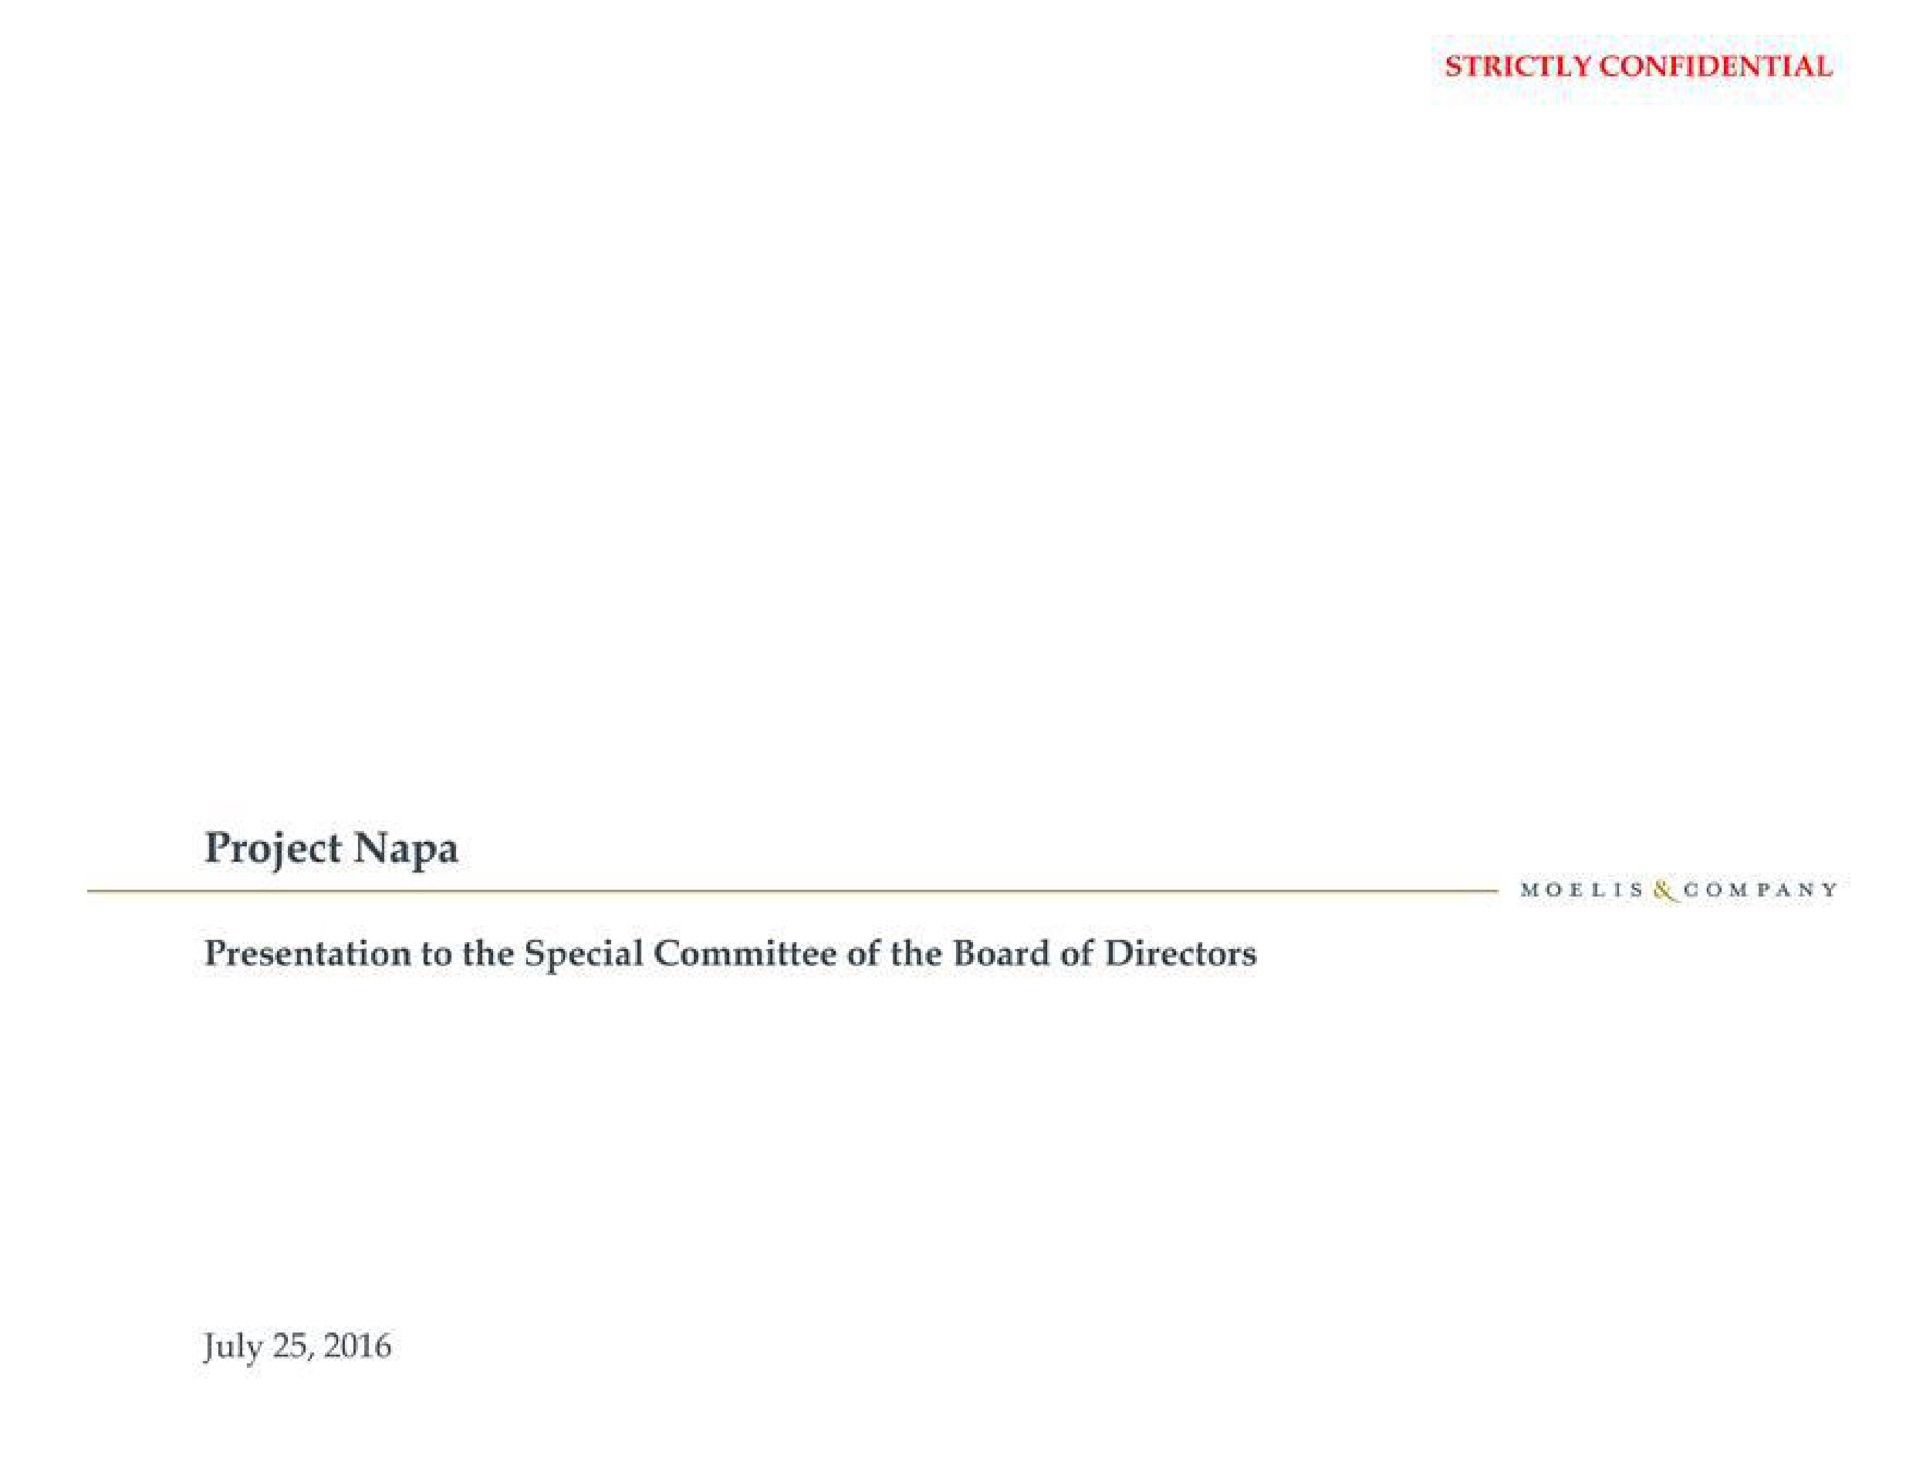 project napa presentation to the special committee of the board of directors | Moelis & Company